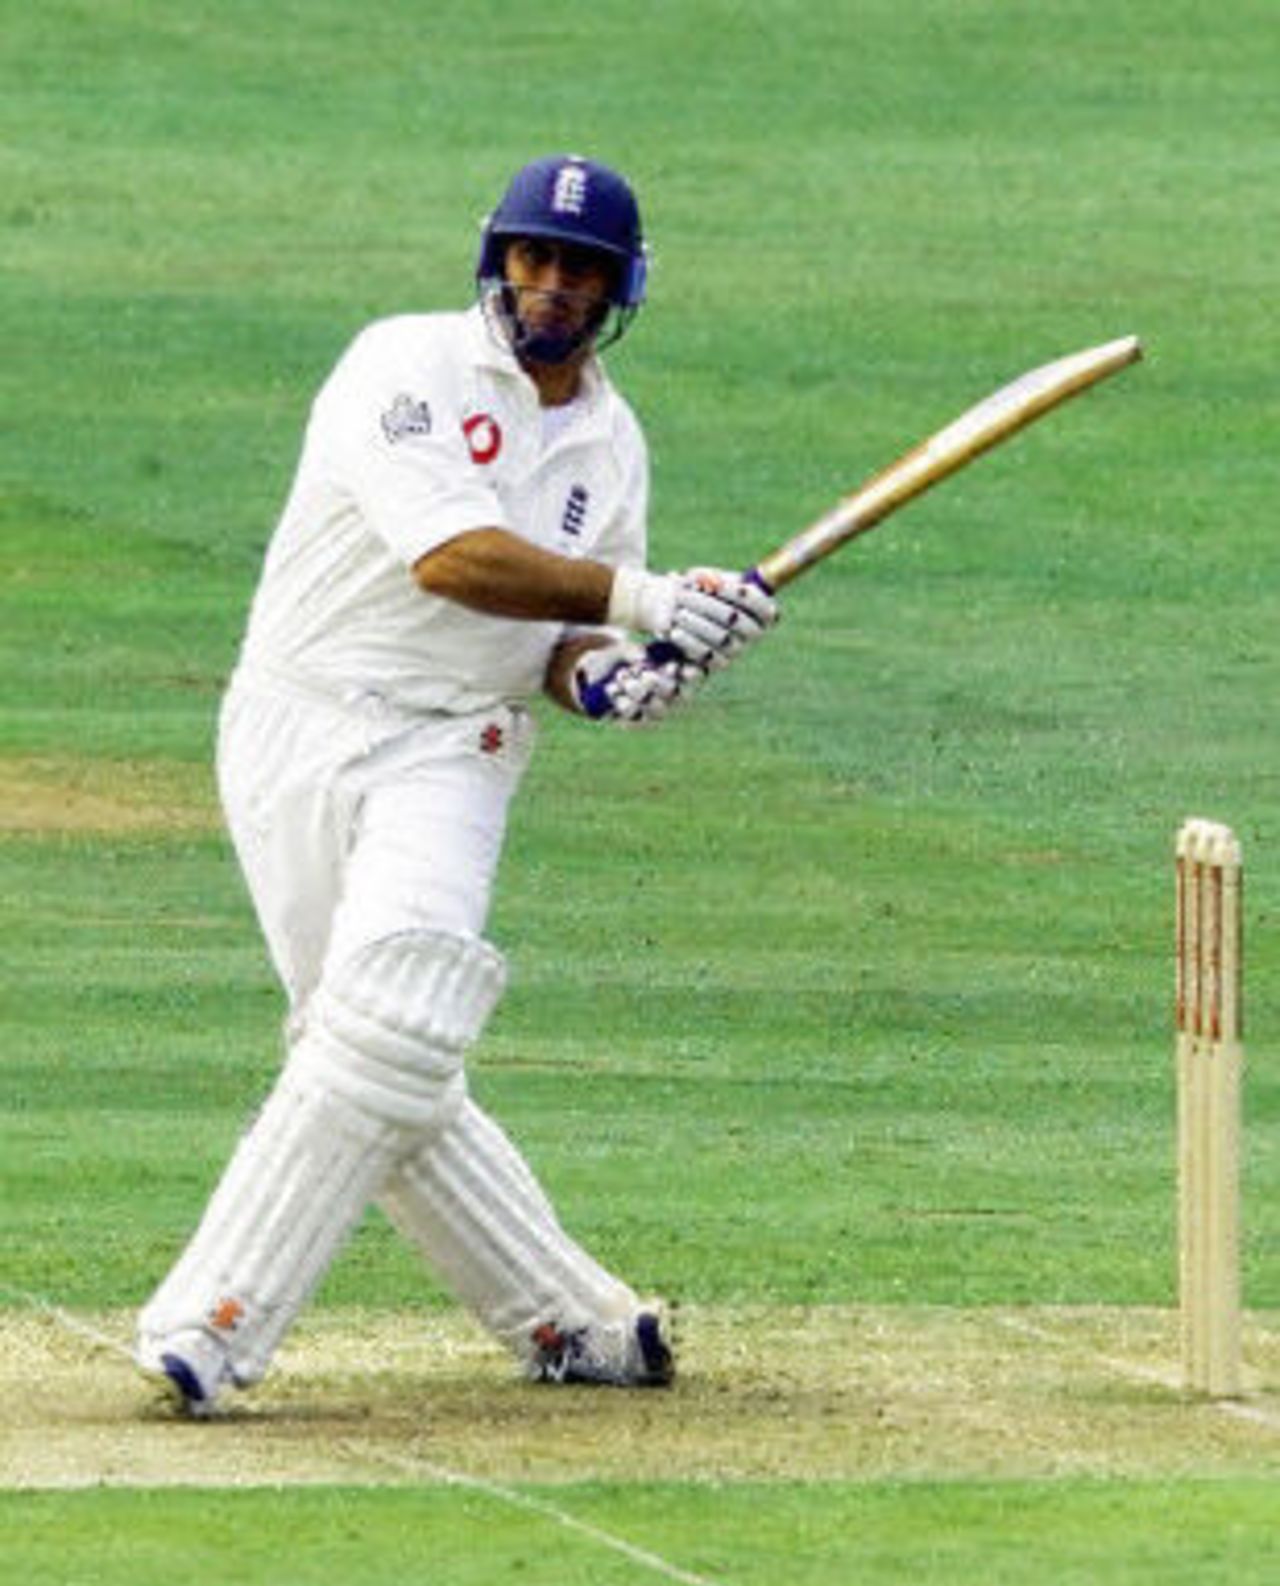 Nasser Hussain hits a four, day 2, 1st Test at Lord's, 17-21 May 2001.